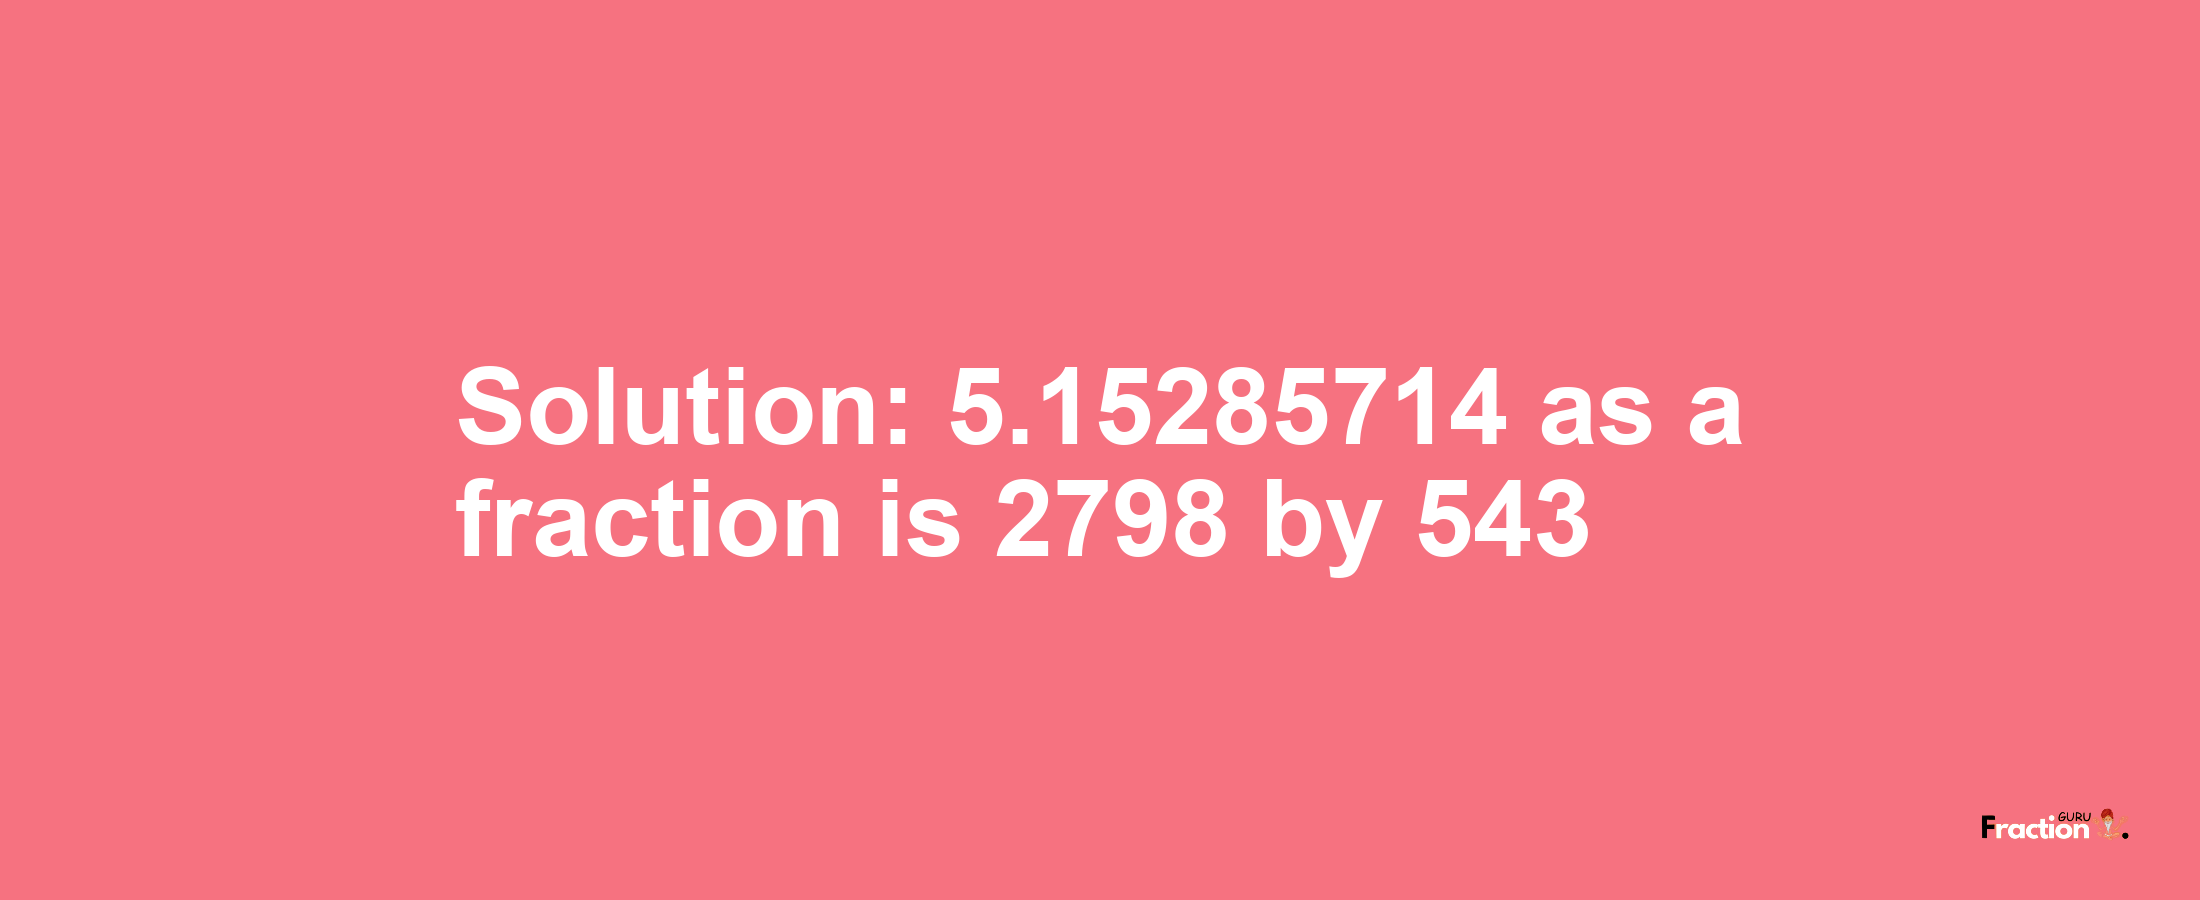 Solution:5.15285714 as a fraction is 2798/543